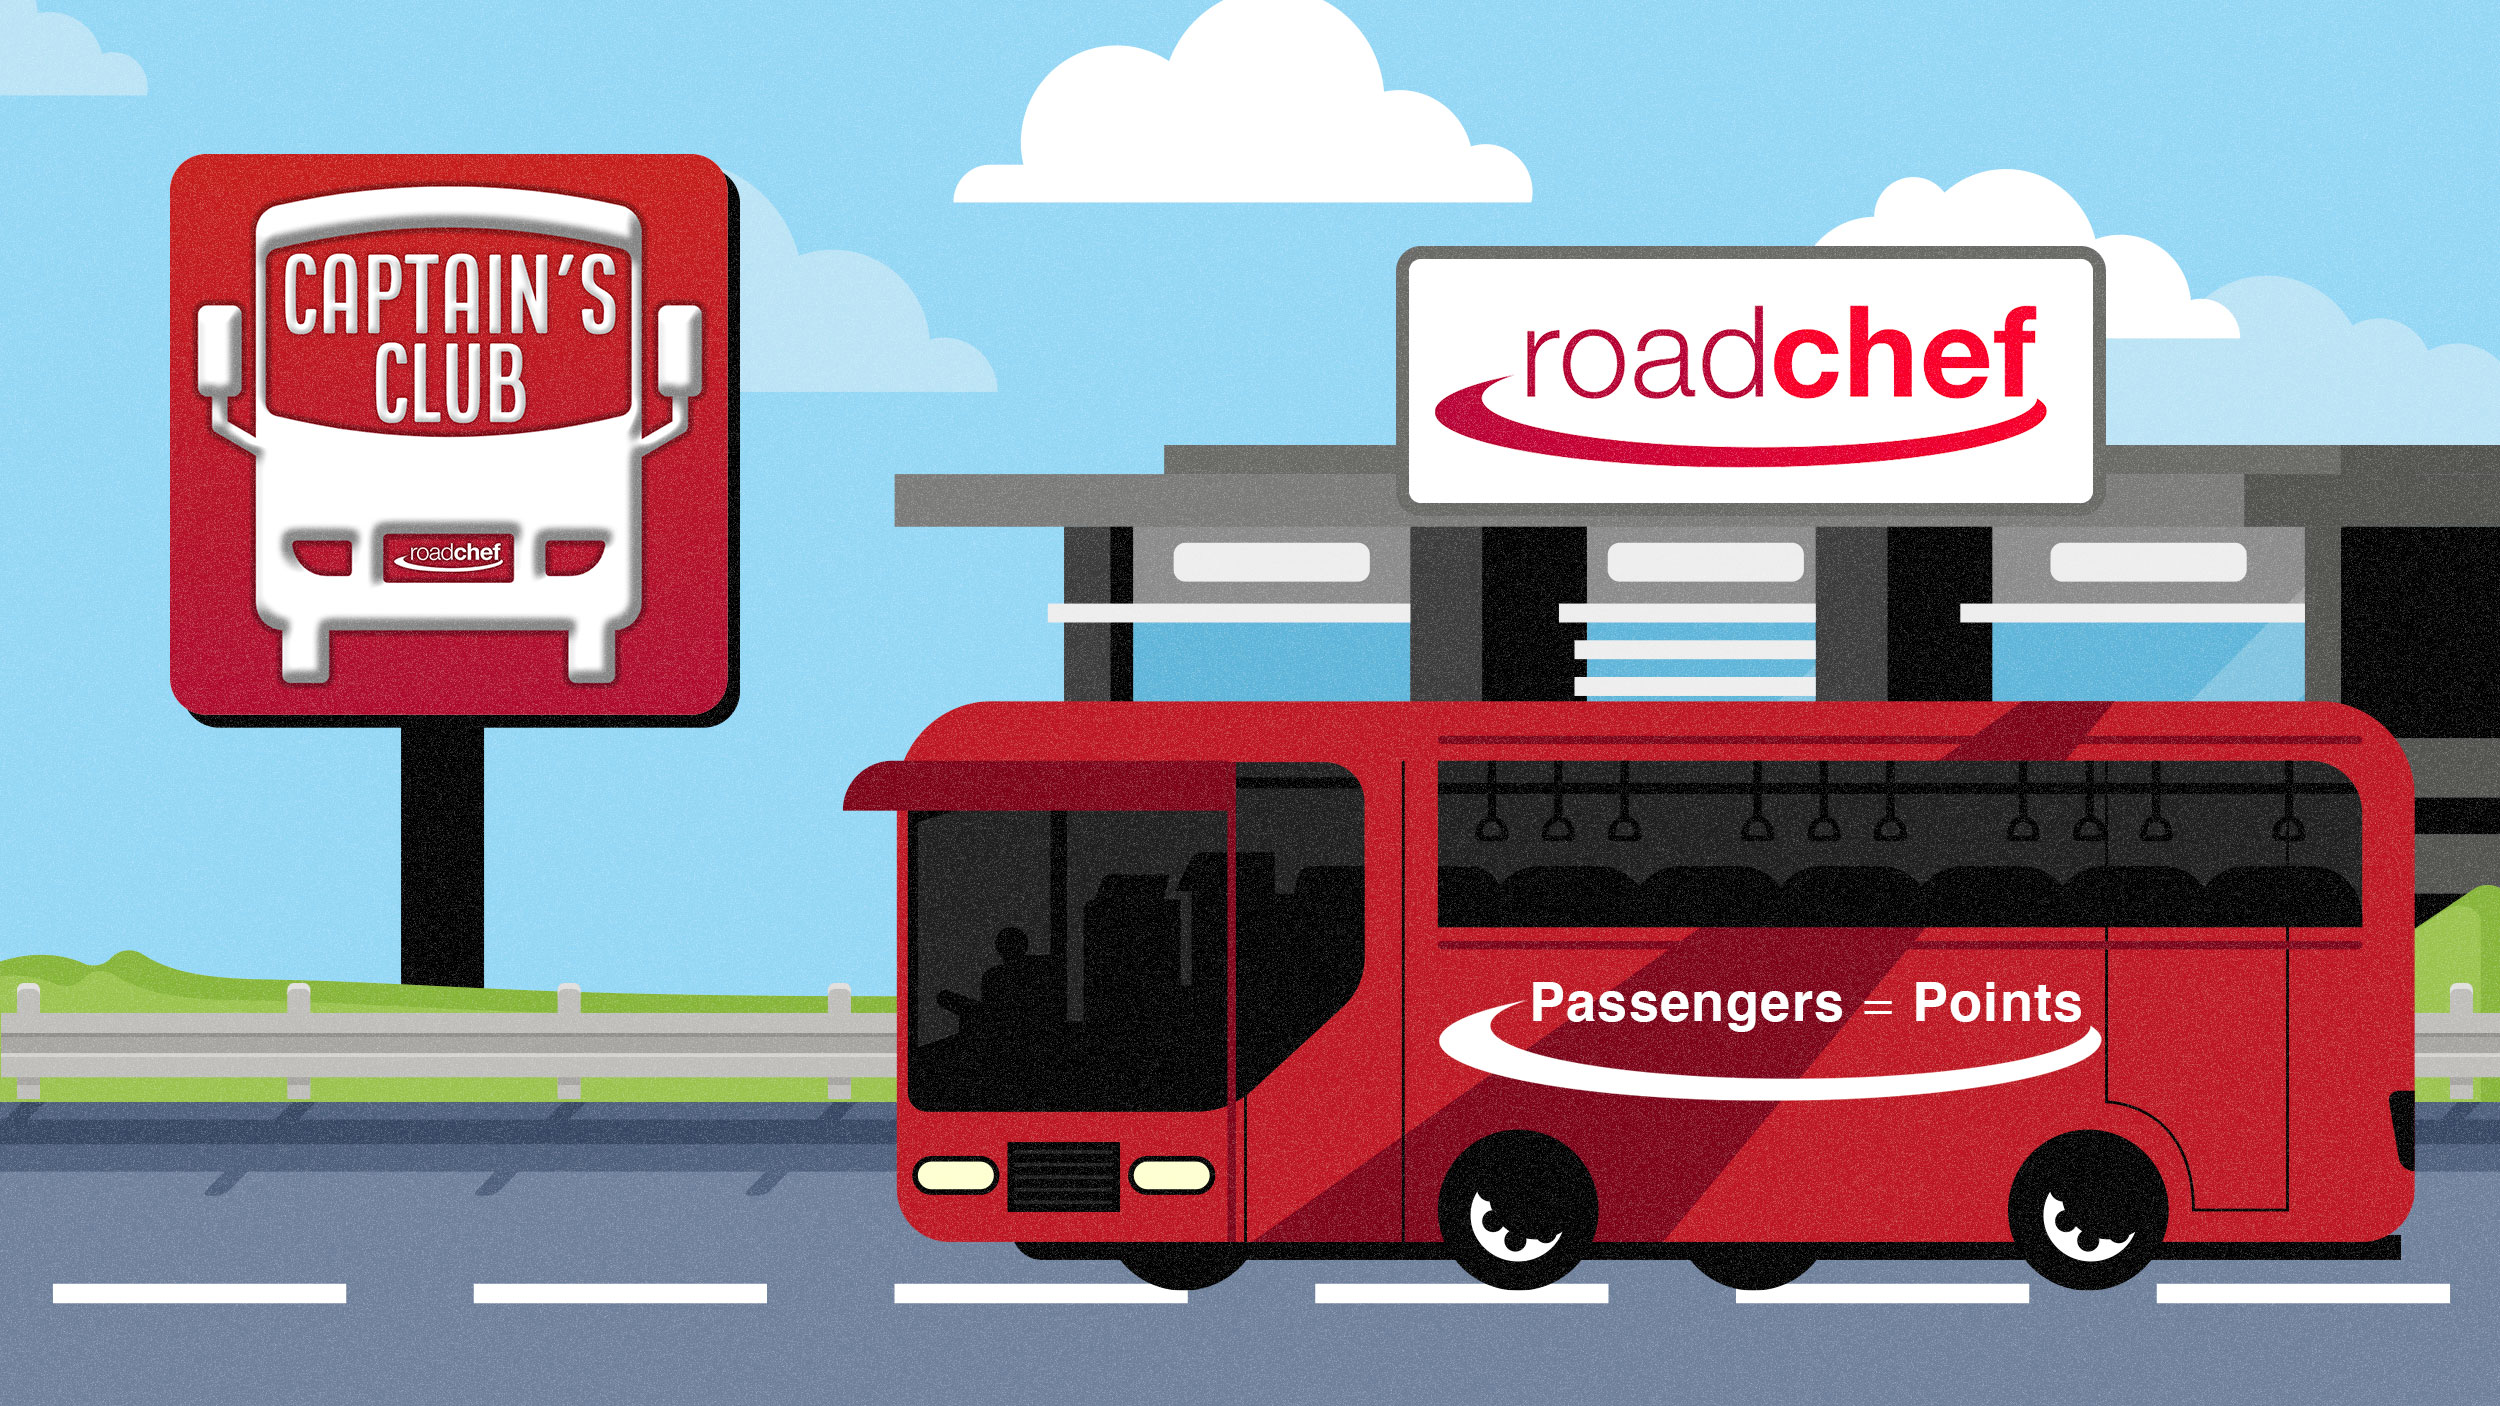 Roadchef supports return of coaching